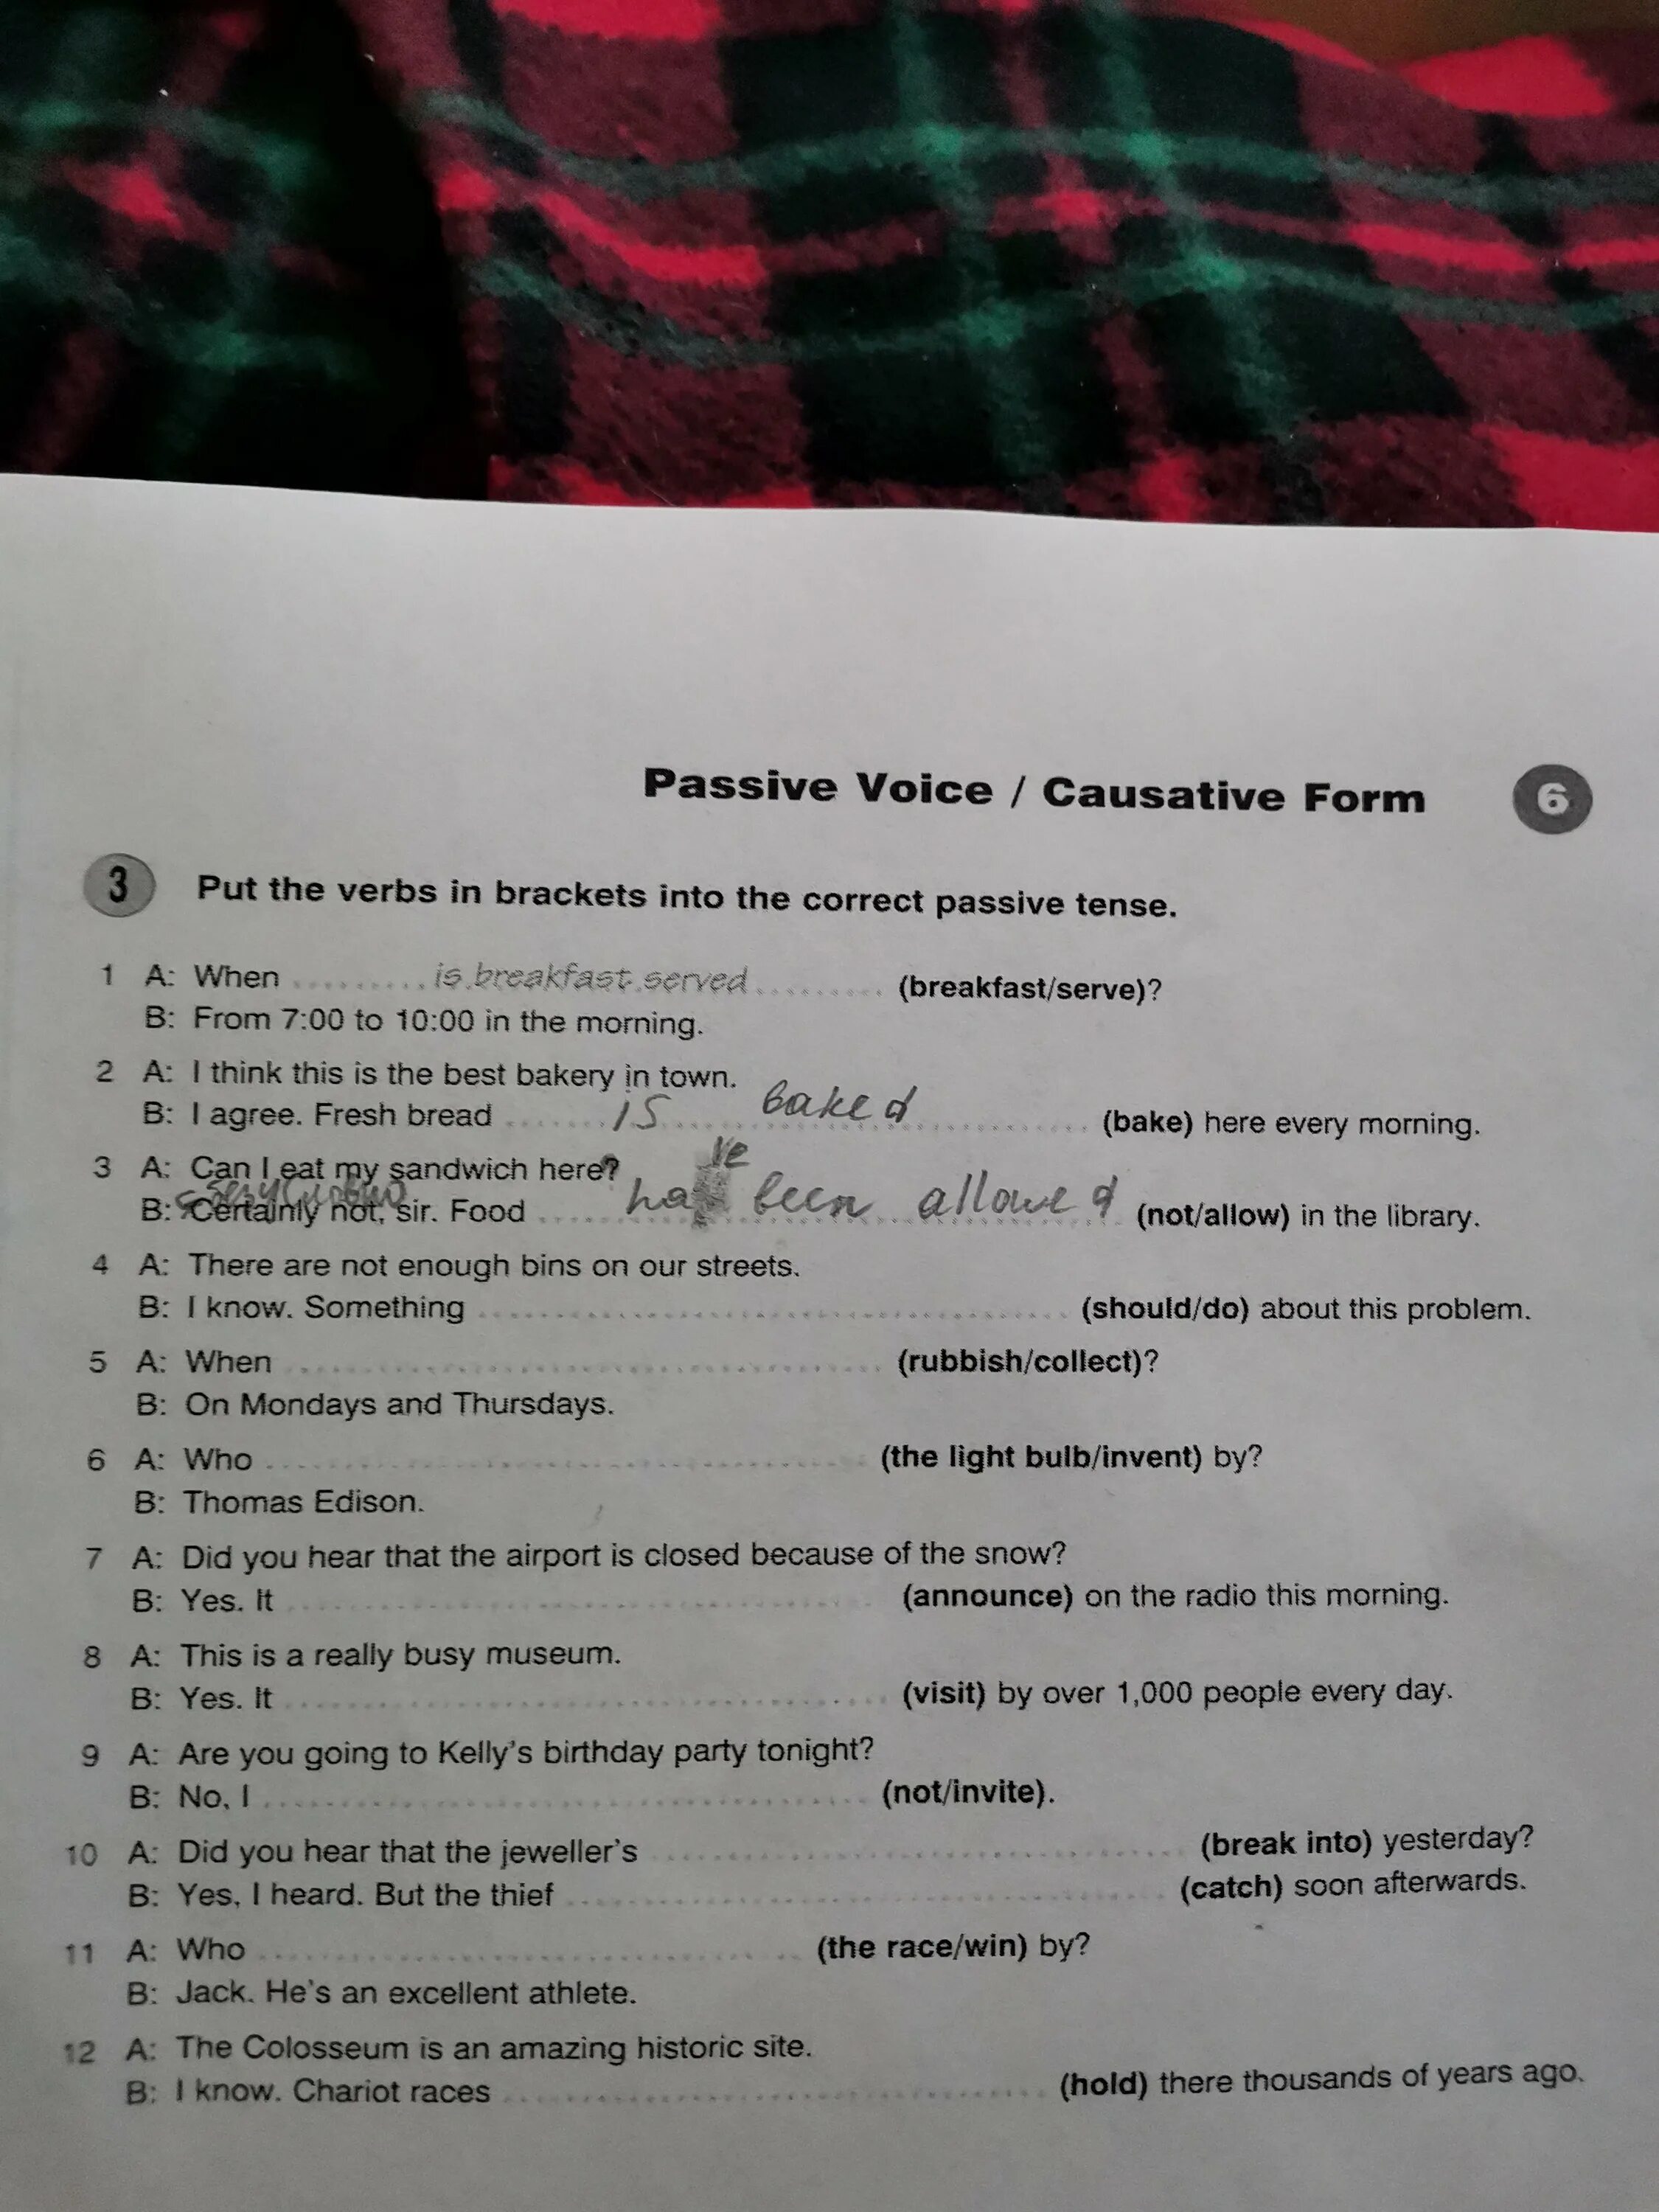 Put the verb into correct passive form. Put the verbs in Brackets into the correct. Put the verbs in Brackets into the correct Passive Tense. 1. Put the verbs in Brackets into the correct Passive Tense. 2. Put the verbs in Brackets into the correct form.